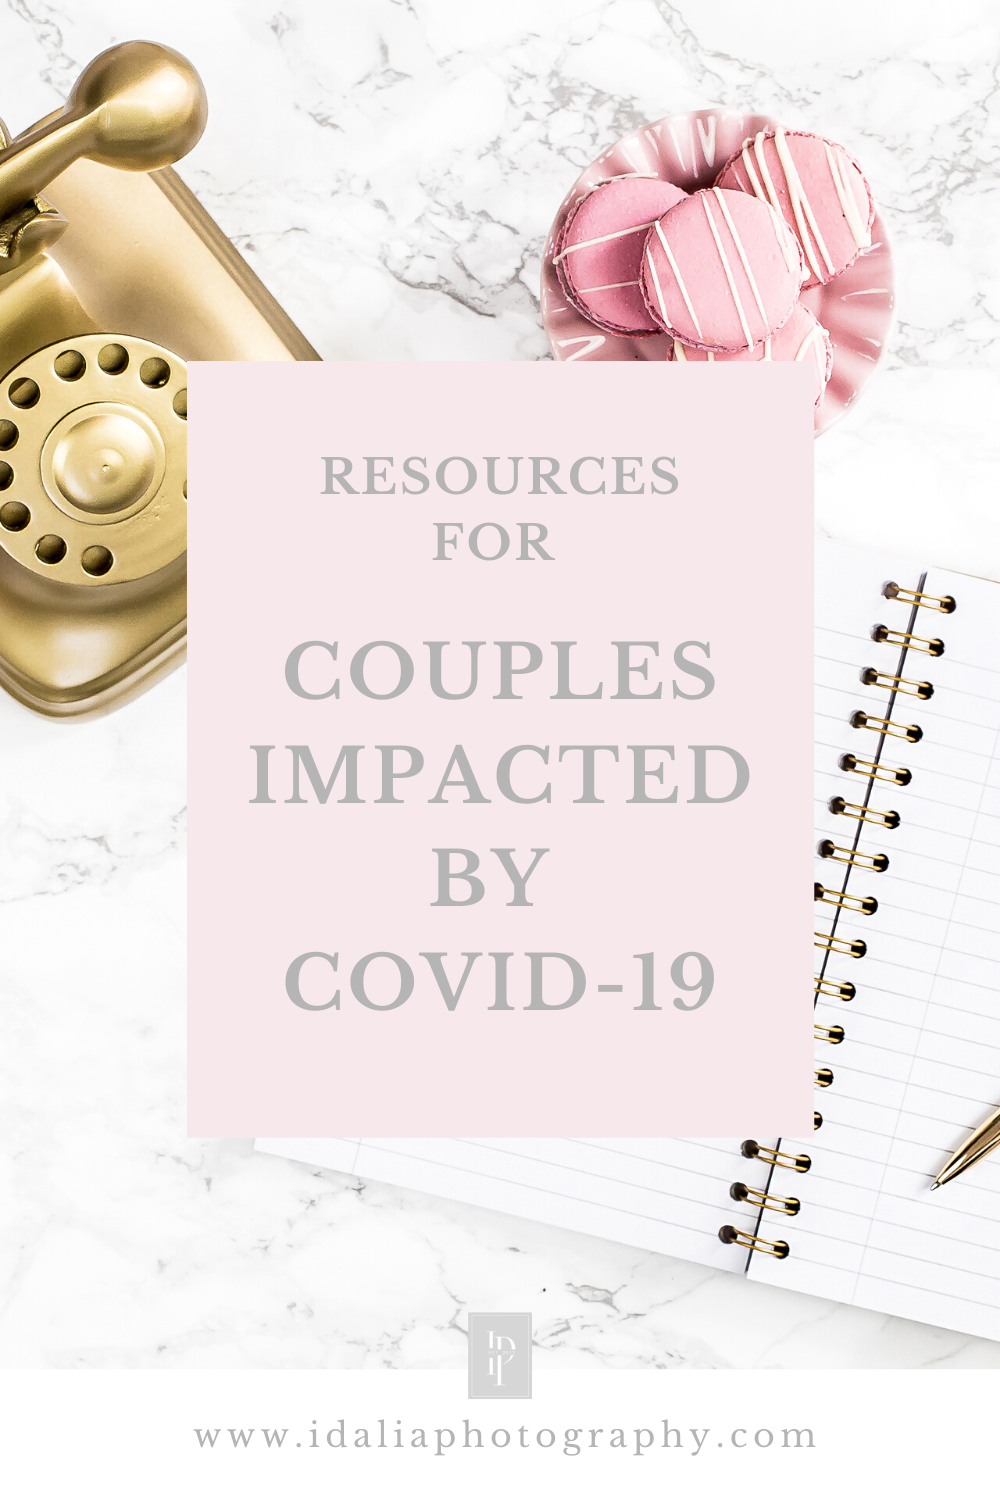 Resources for Couples Impacted by COVID-19